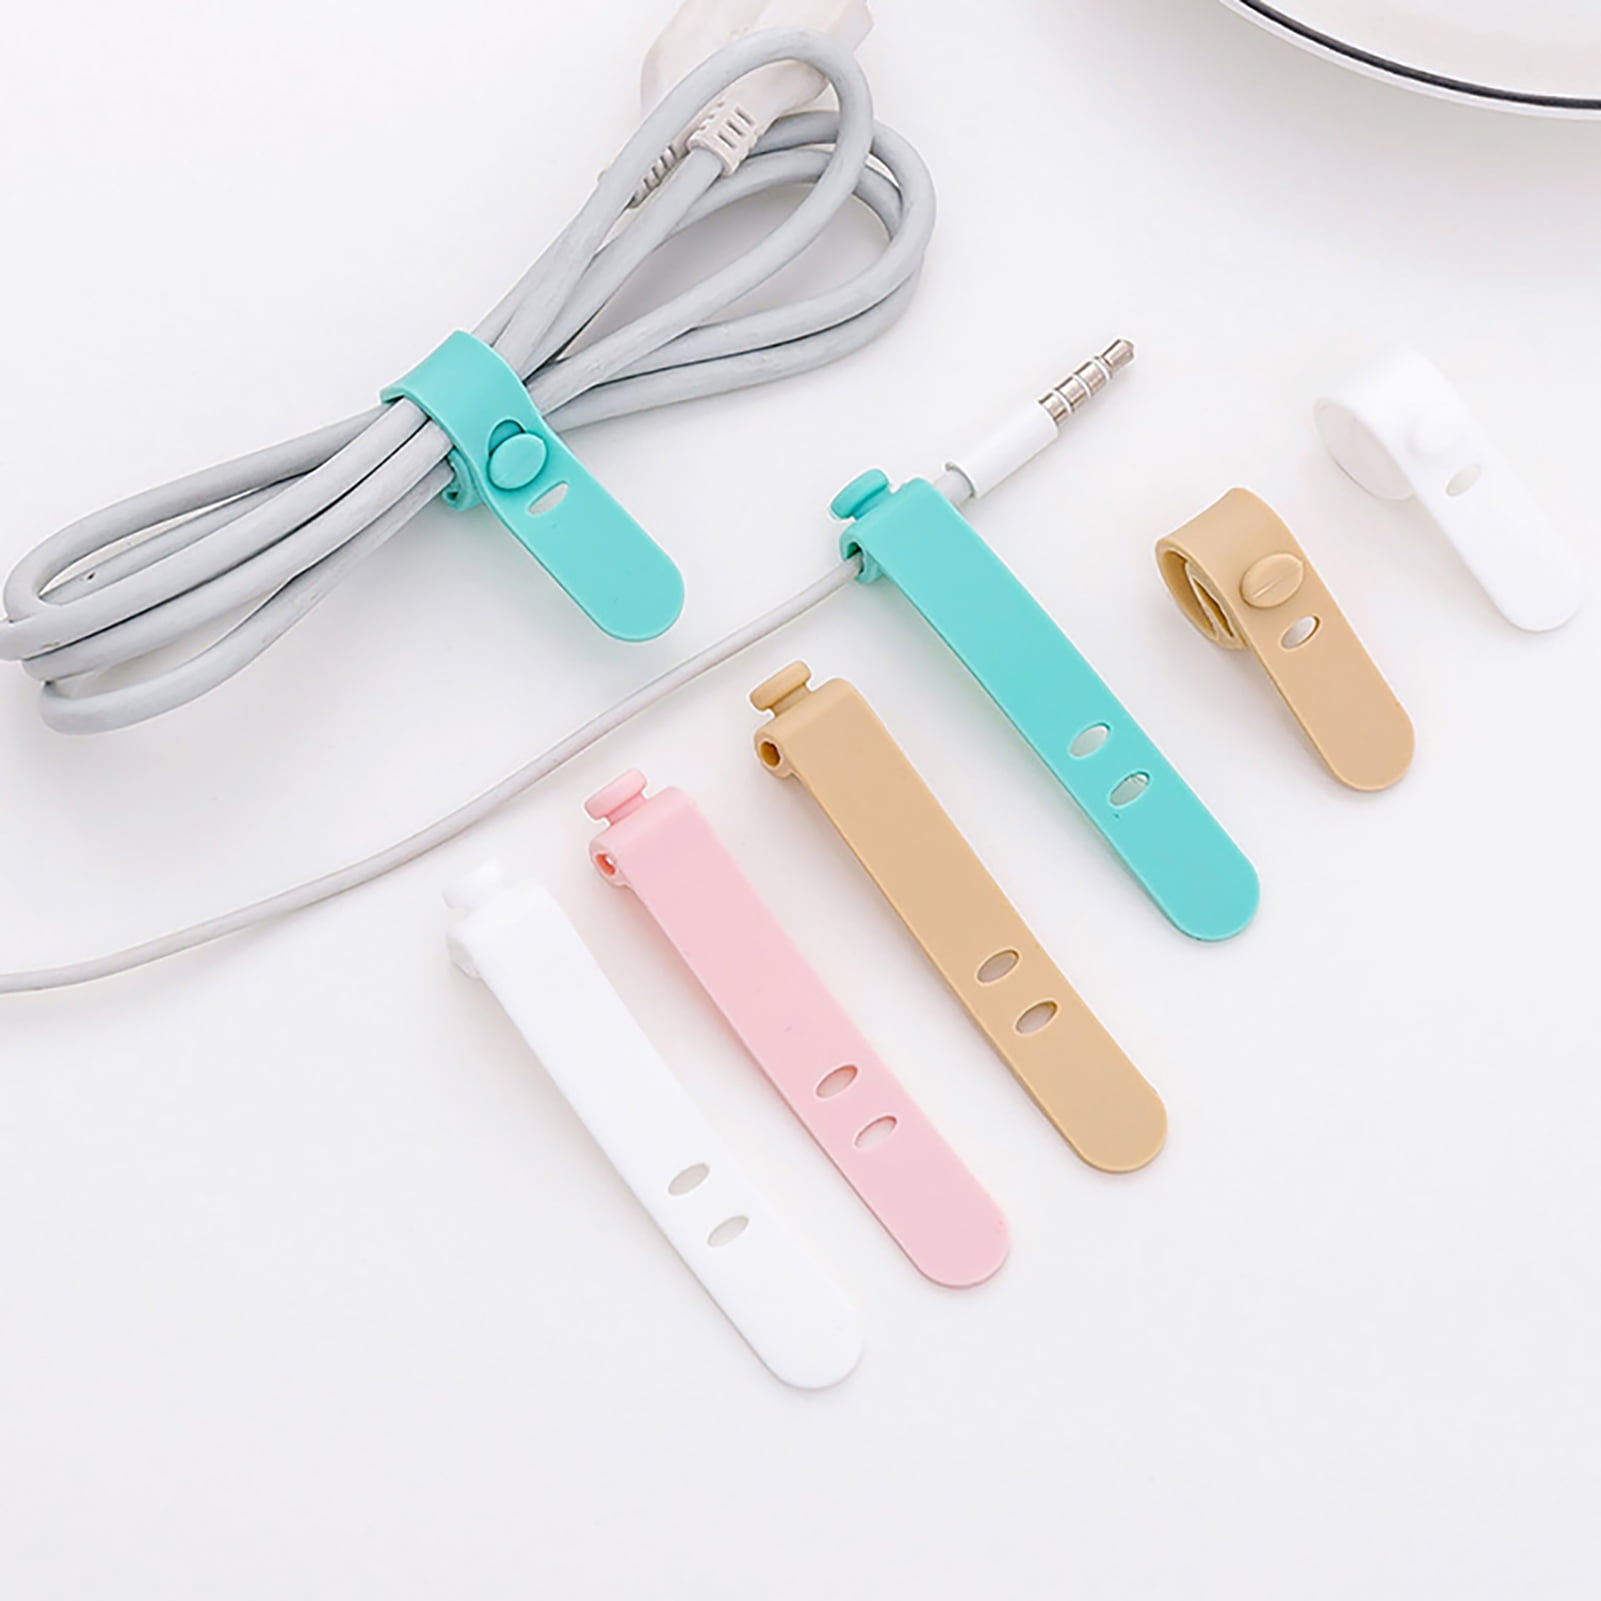 Earbud Holder Earphone Case Tangle Free Cord Organizer Earbuds Wrap  Silicone Magnetic Headphone Holder Storage Case Cable Keeper for iPhone